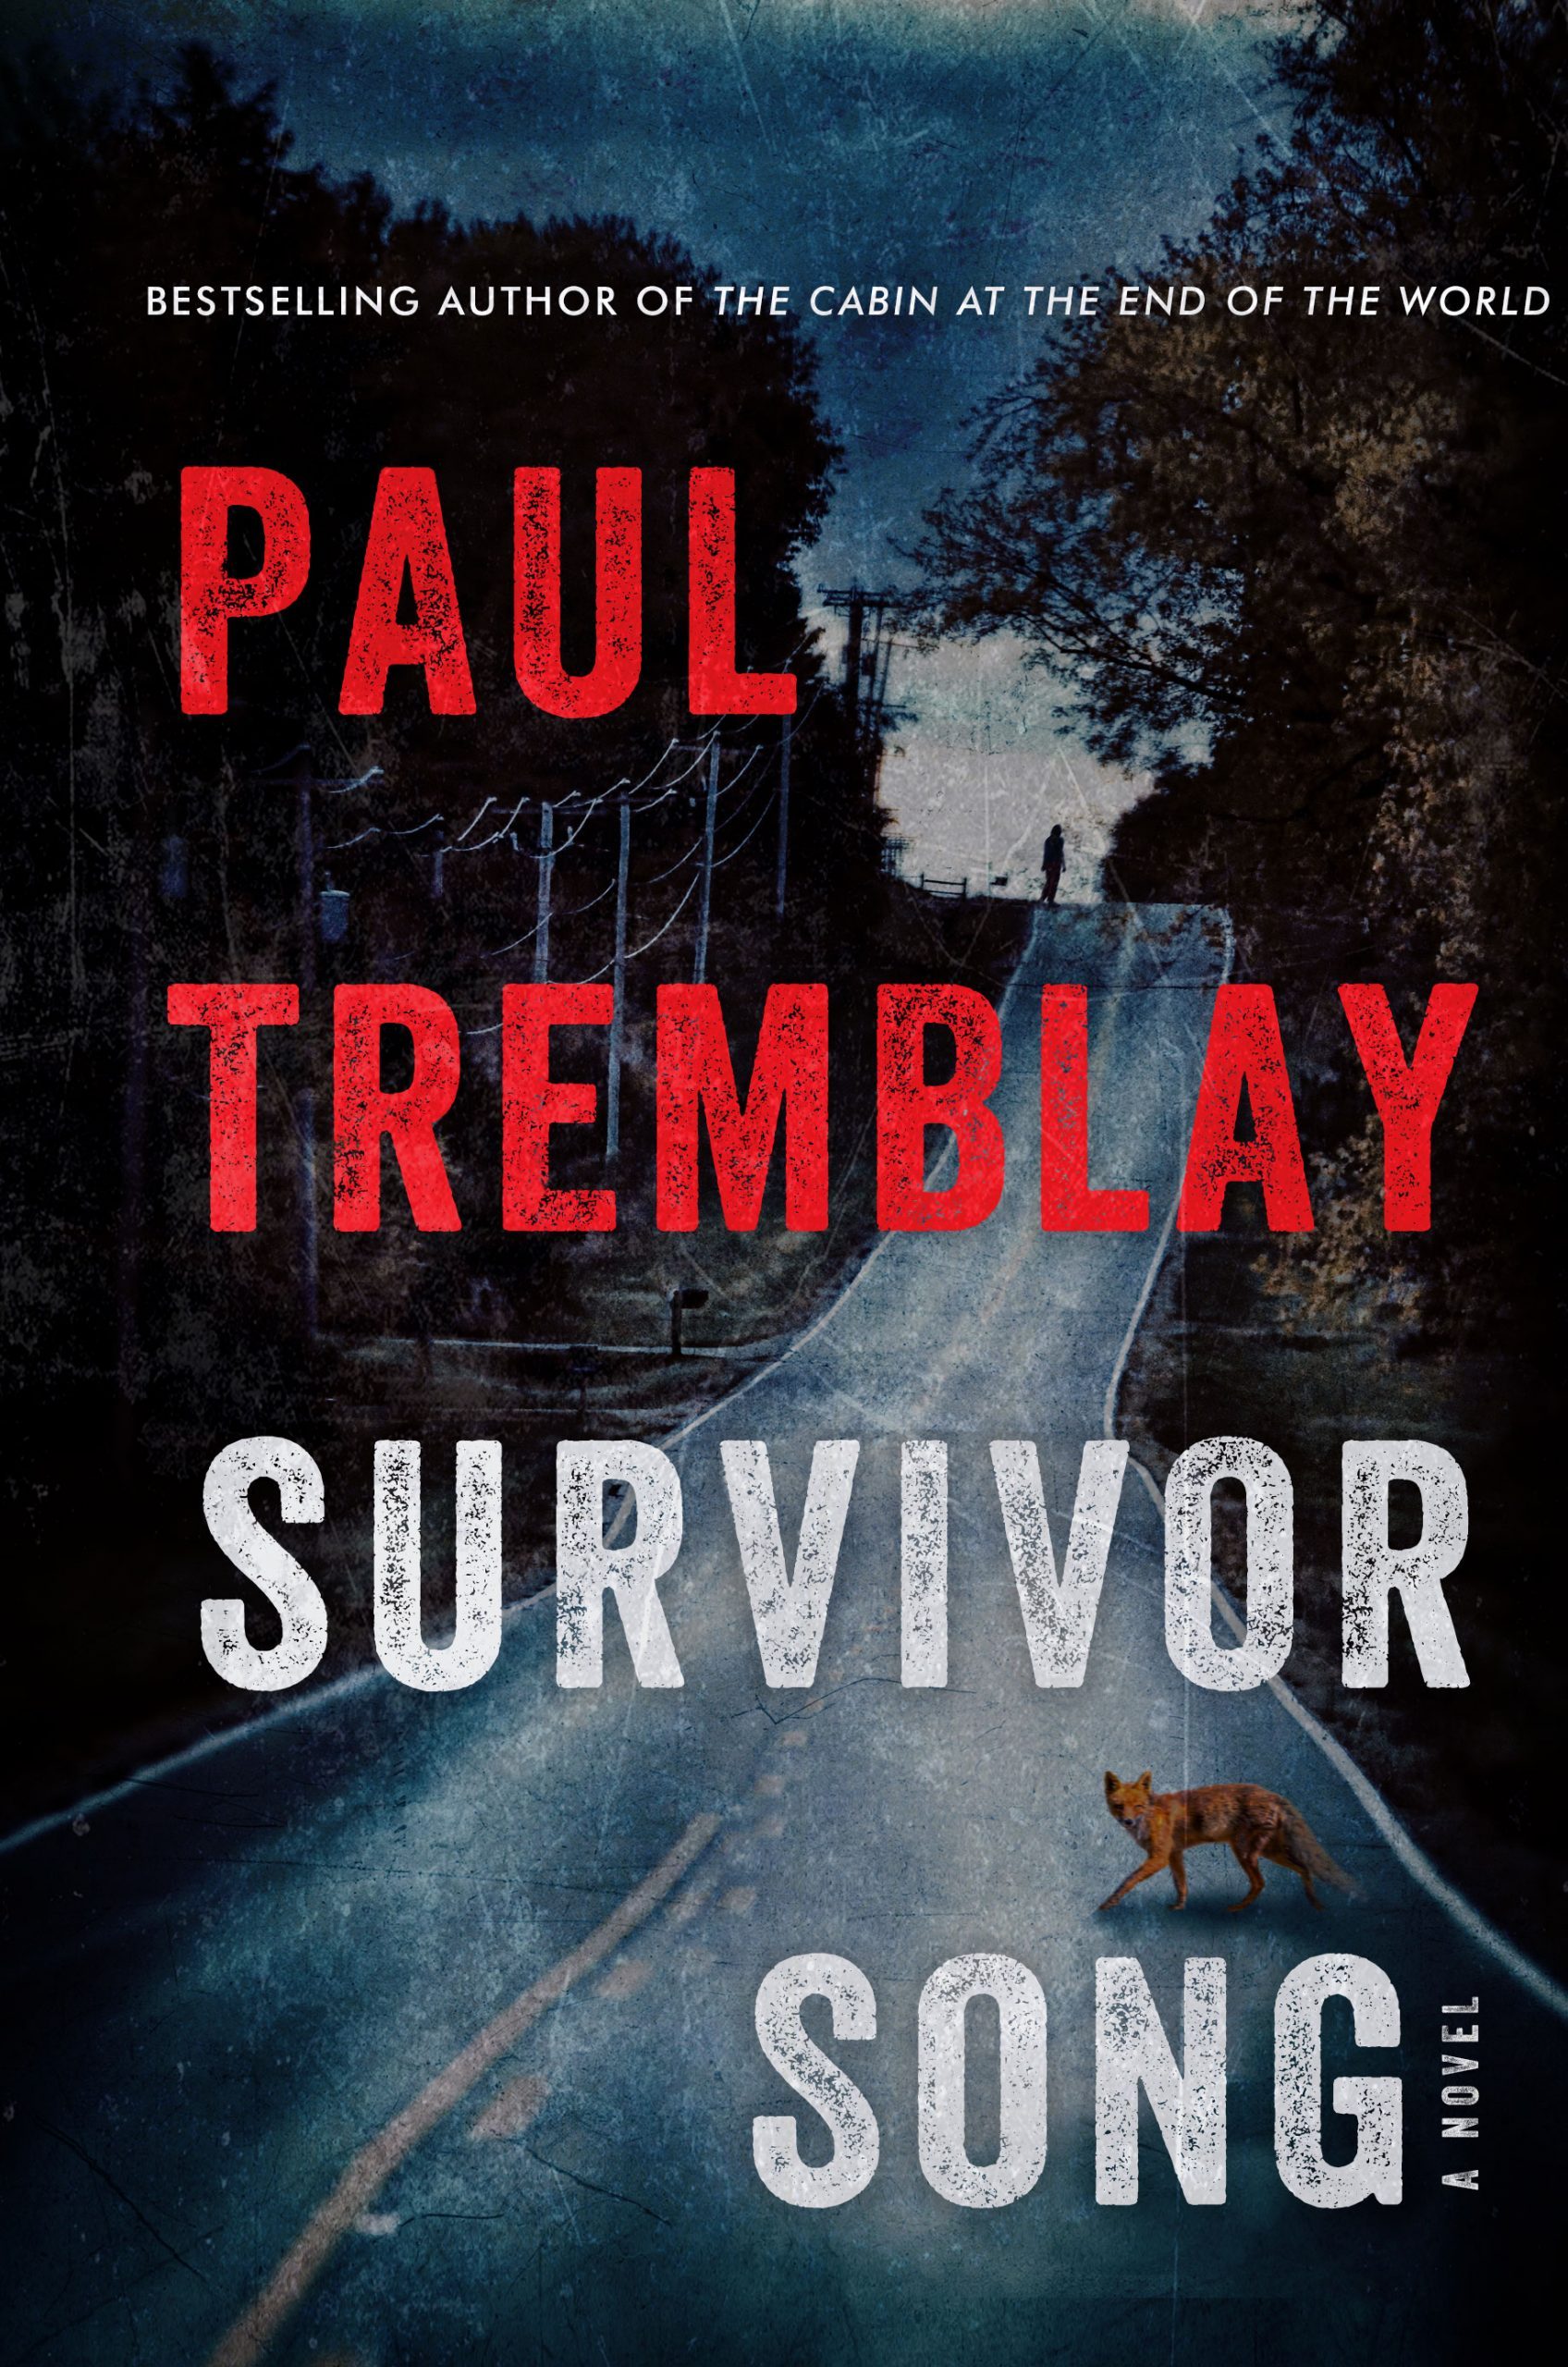 Does Survivor Song By Paul Tremblay Release Today? 2020 Horror & Thriller Releases